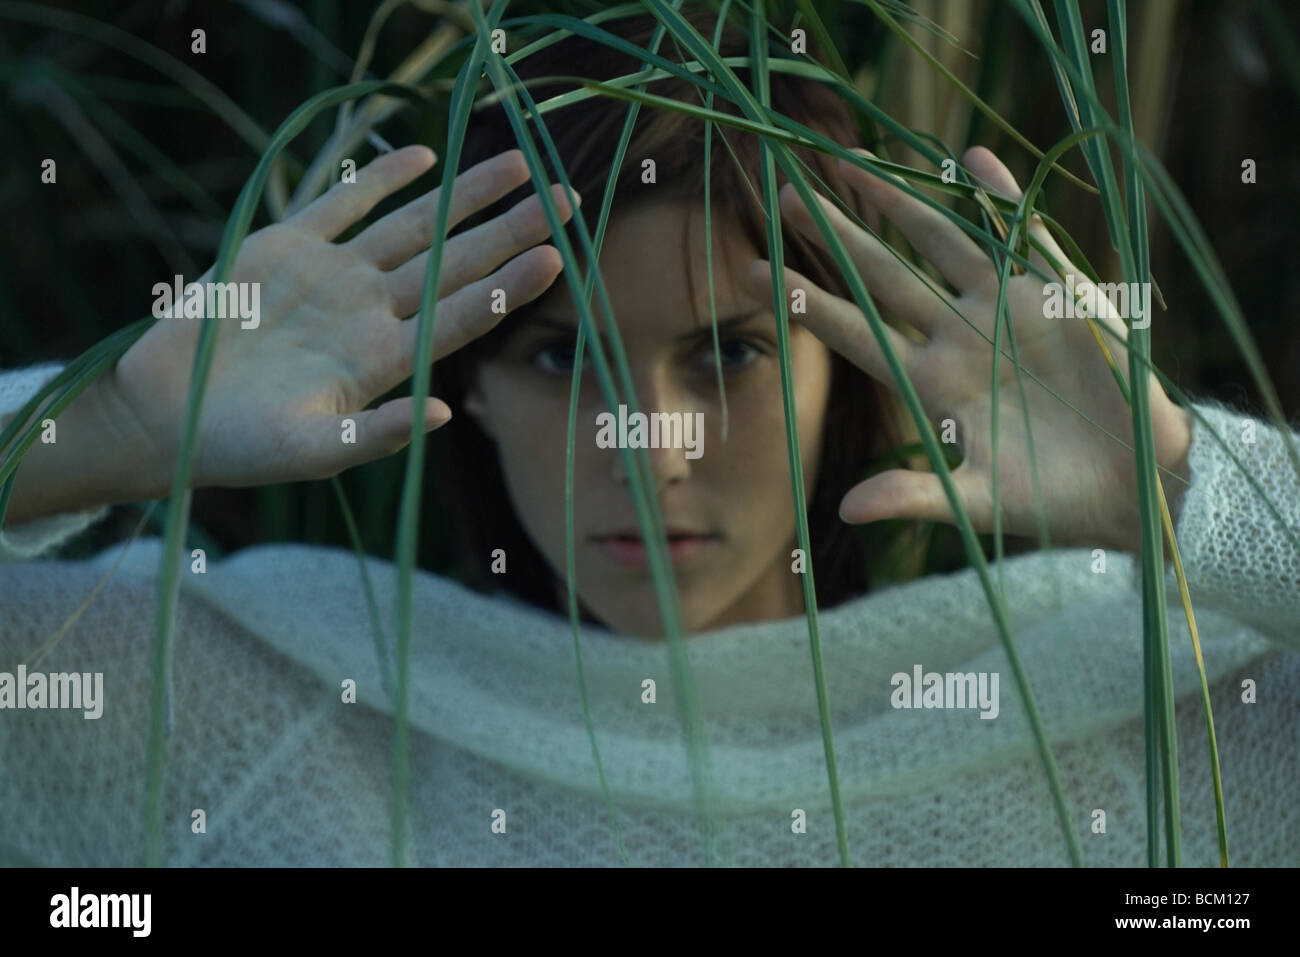 Woman looking through tall grass, hands raised, close-up Stock Photo